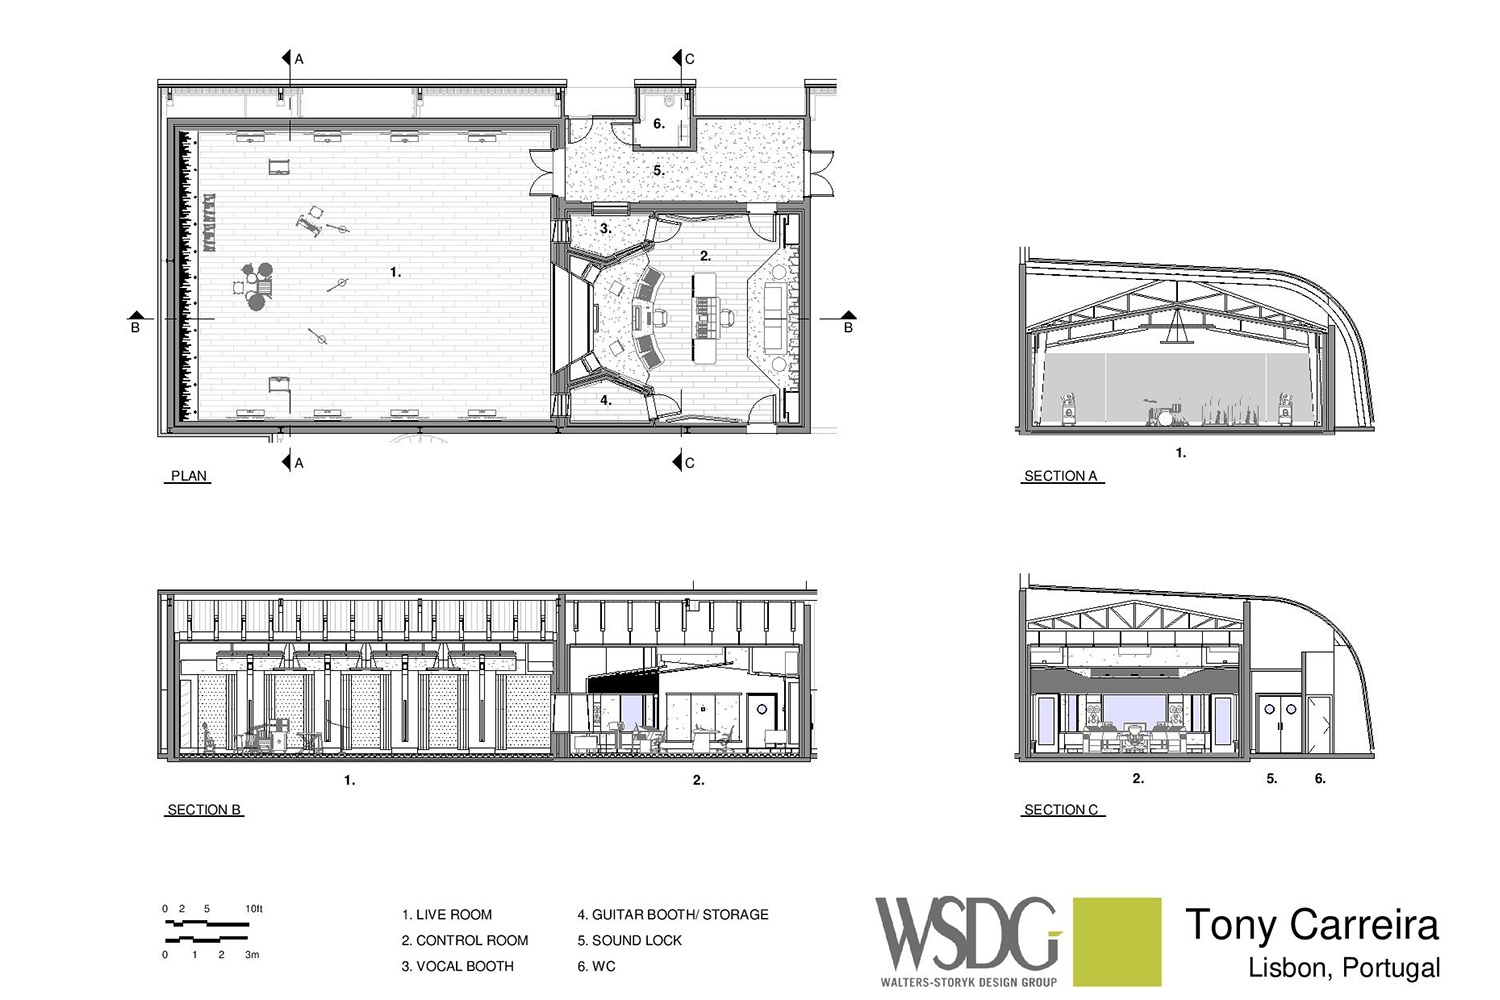 Tony Carreira Studios. WSDG was brought on to redesign the warehouse into a multi-functional recording facility with live streaming and video production capabilities. Presentation drawings.